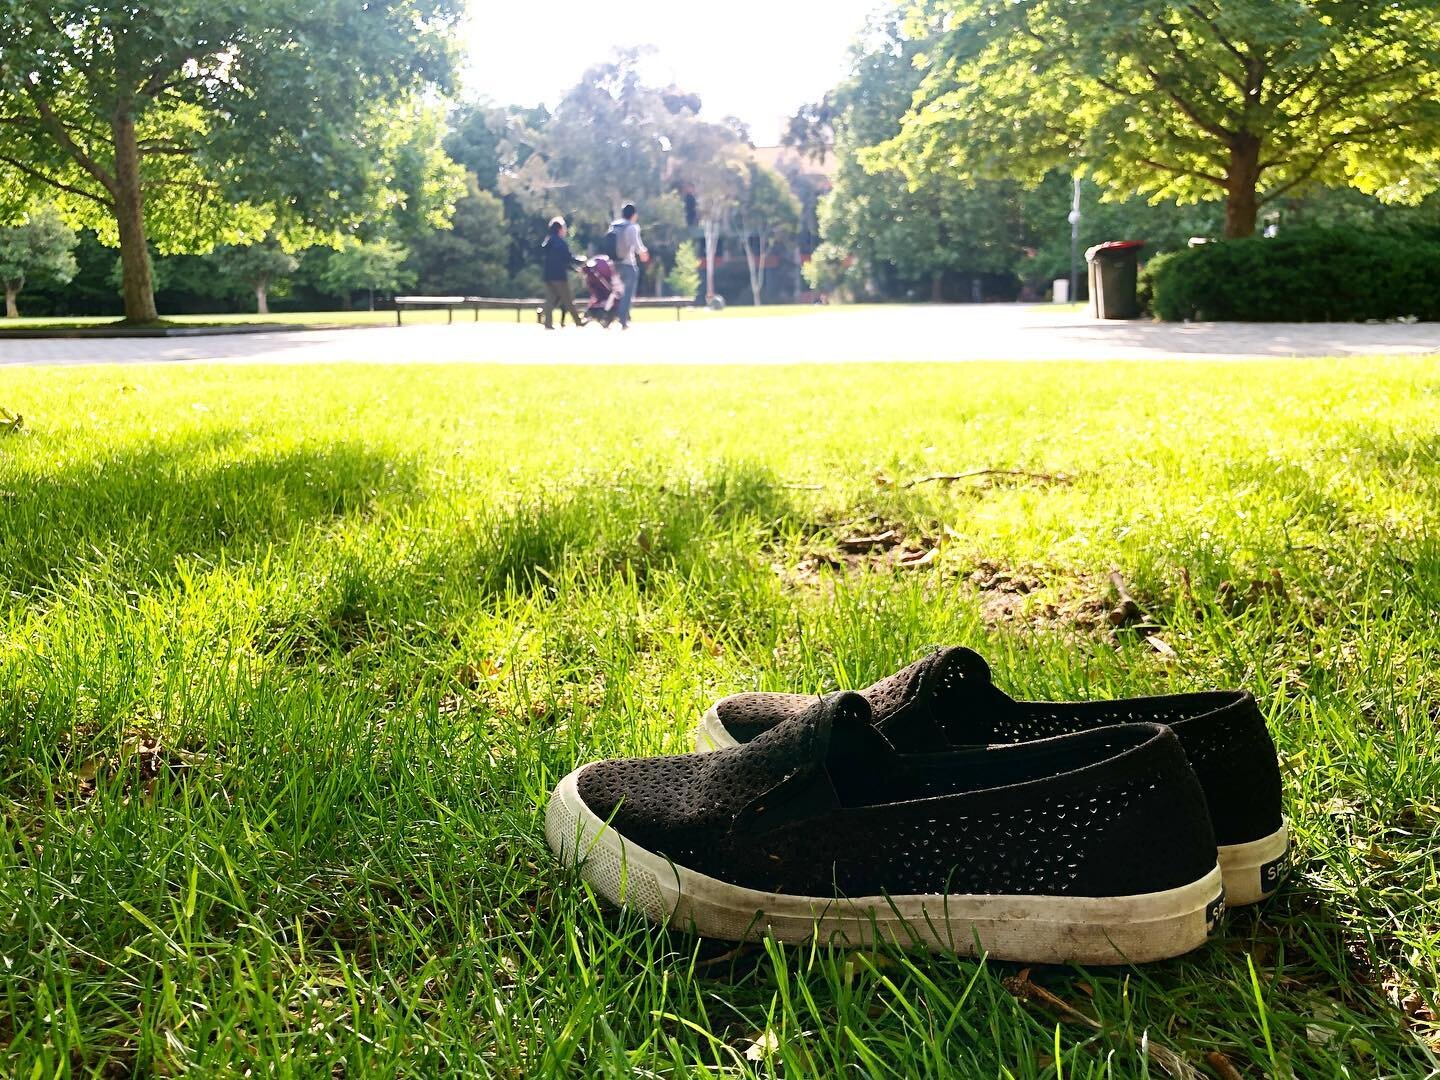 Barefoot (with many thanks to @fox_cottage for the time)
South Lawn
University of Melbourne 
Parkville
Melbourne Victoria Australia 
December 2019